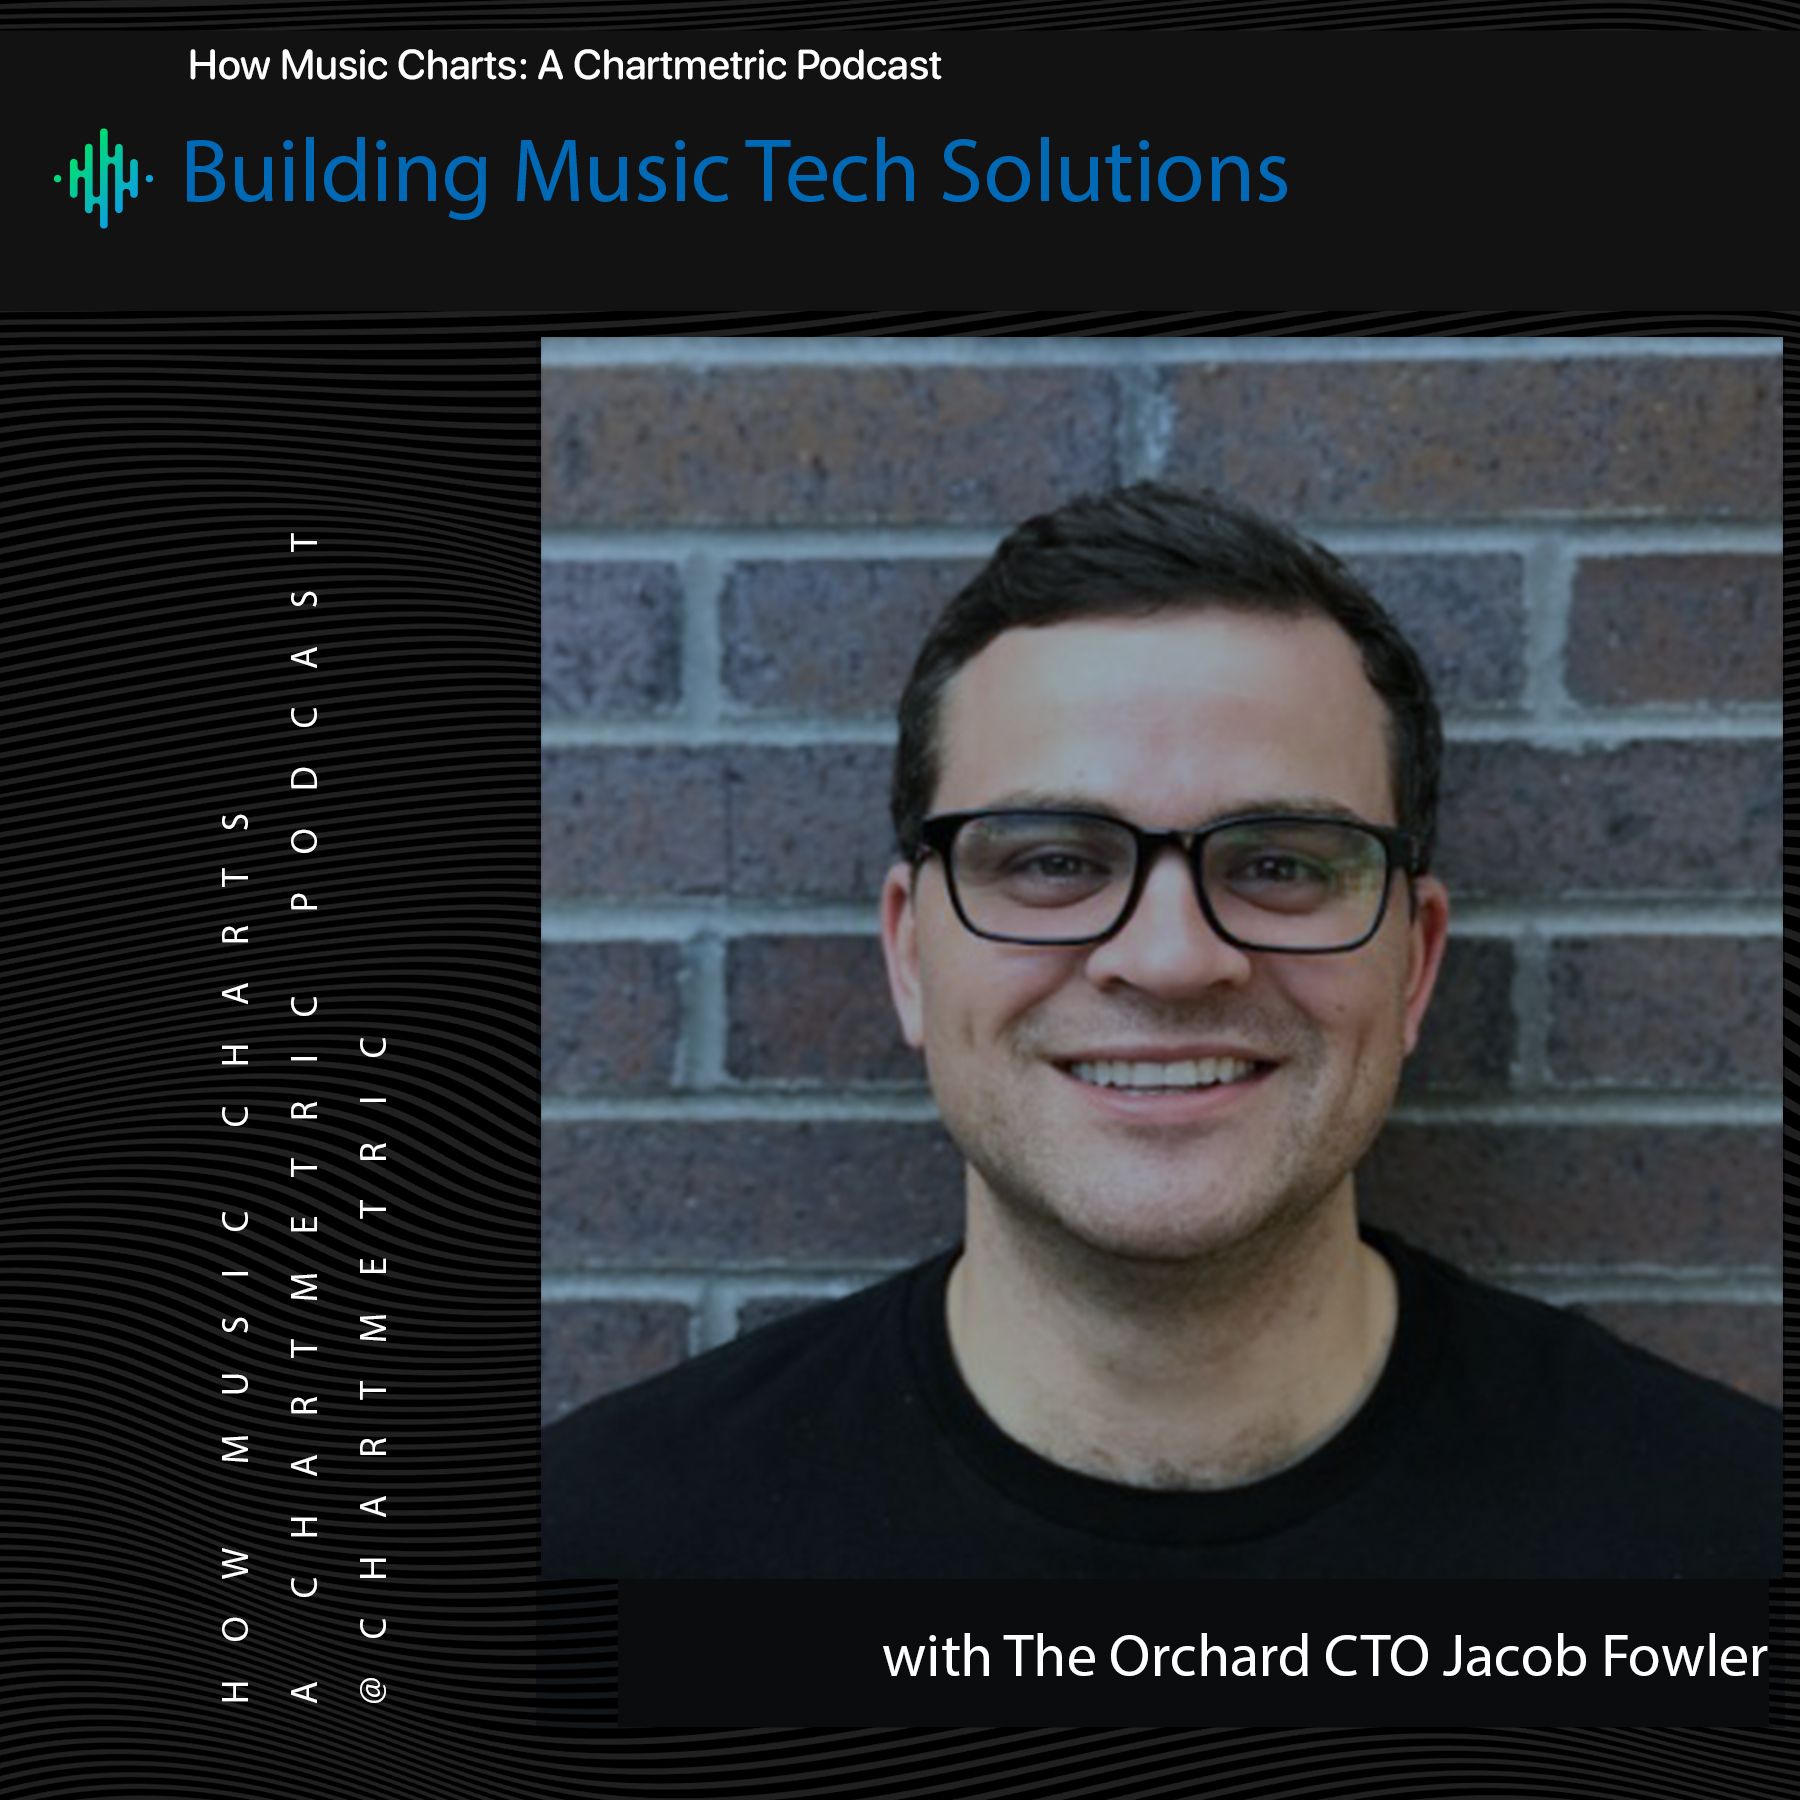 Building Music Tech Solutions With The Orchard CTO Jacob Fowler